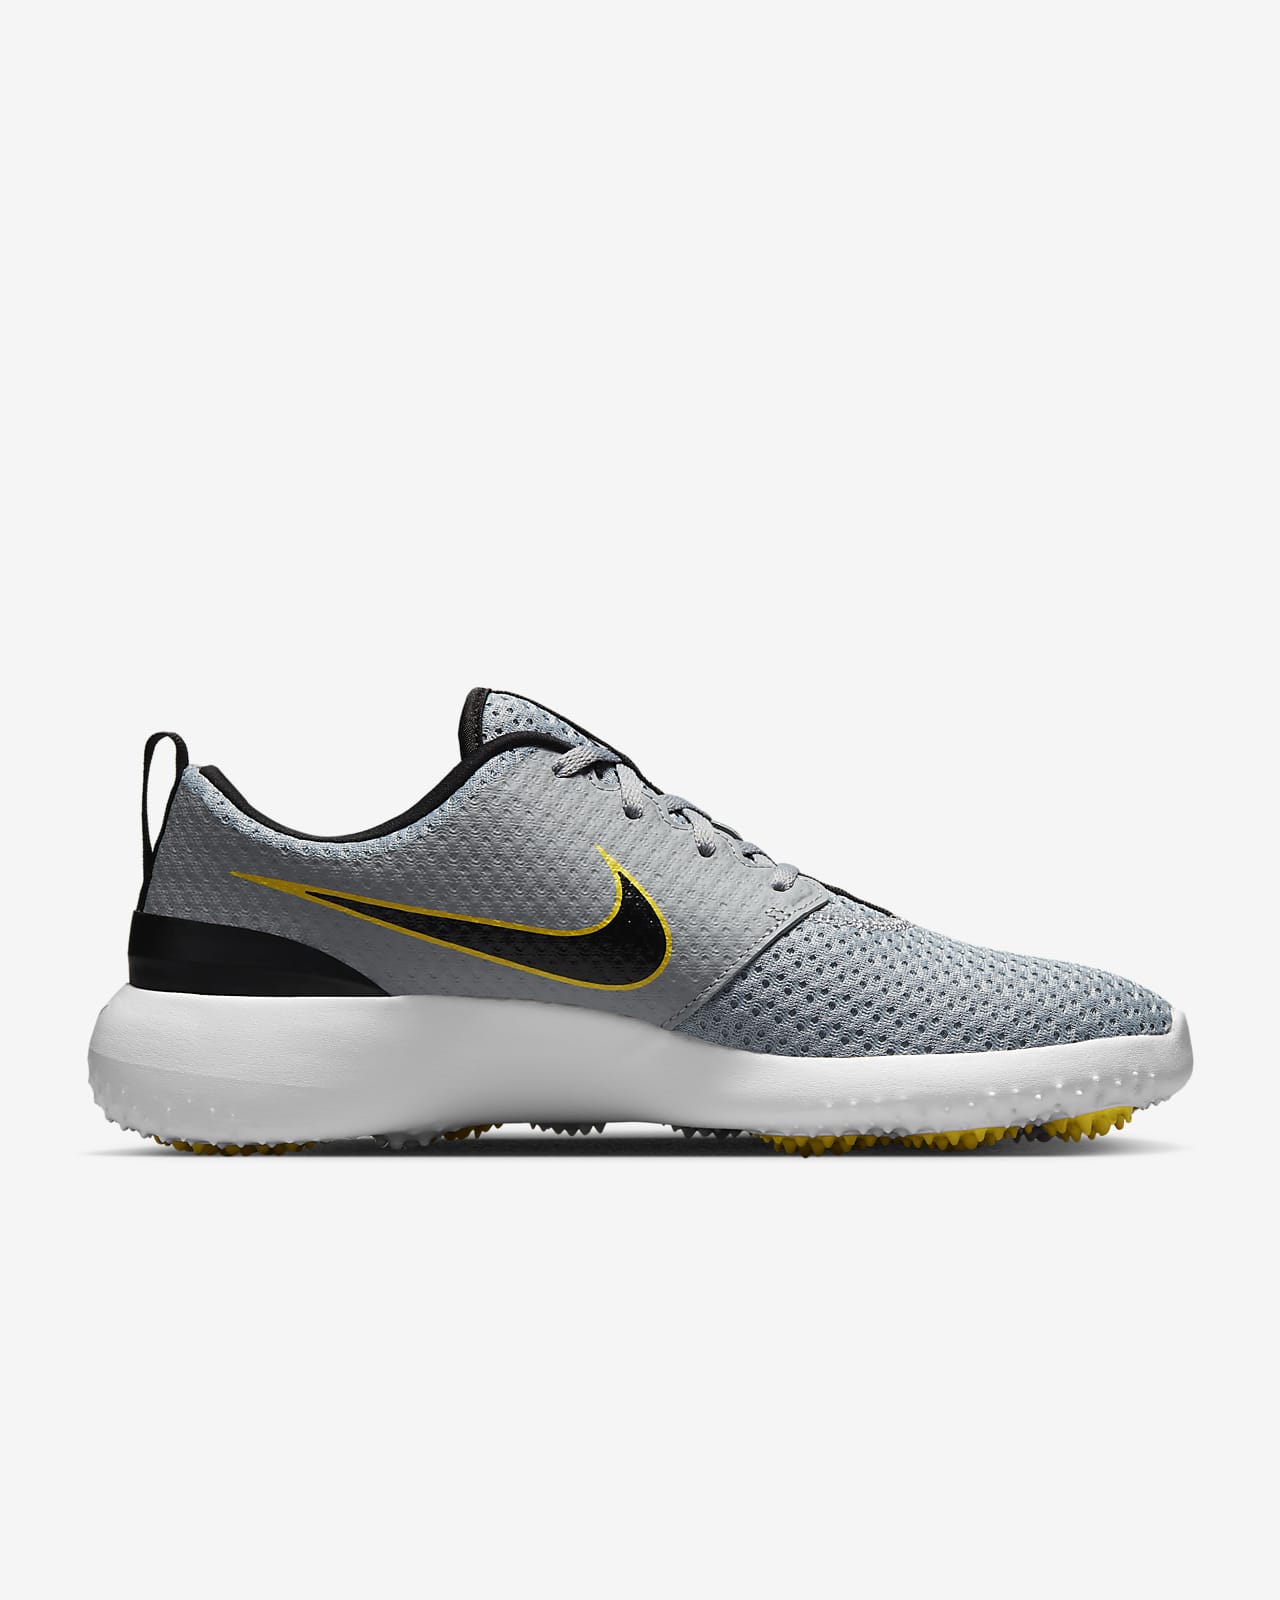 nike roshe g golf shoes review